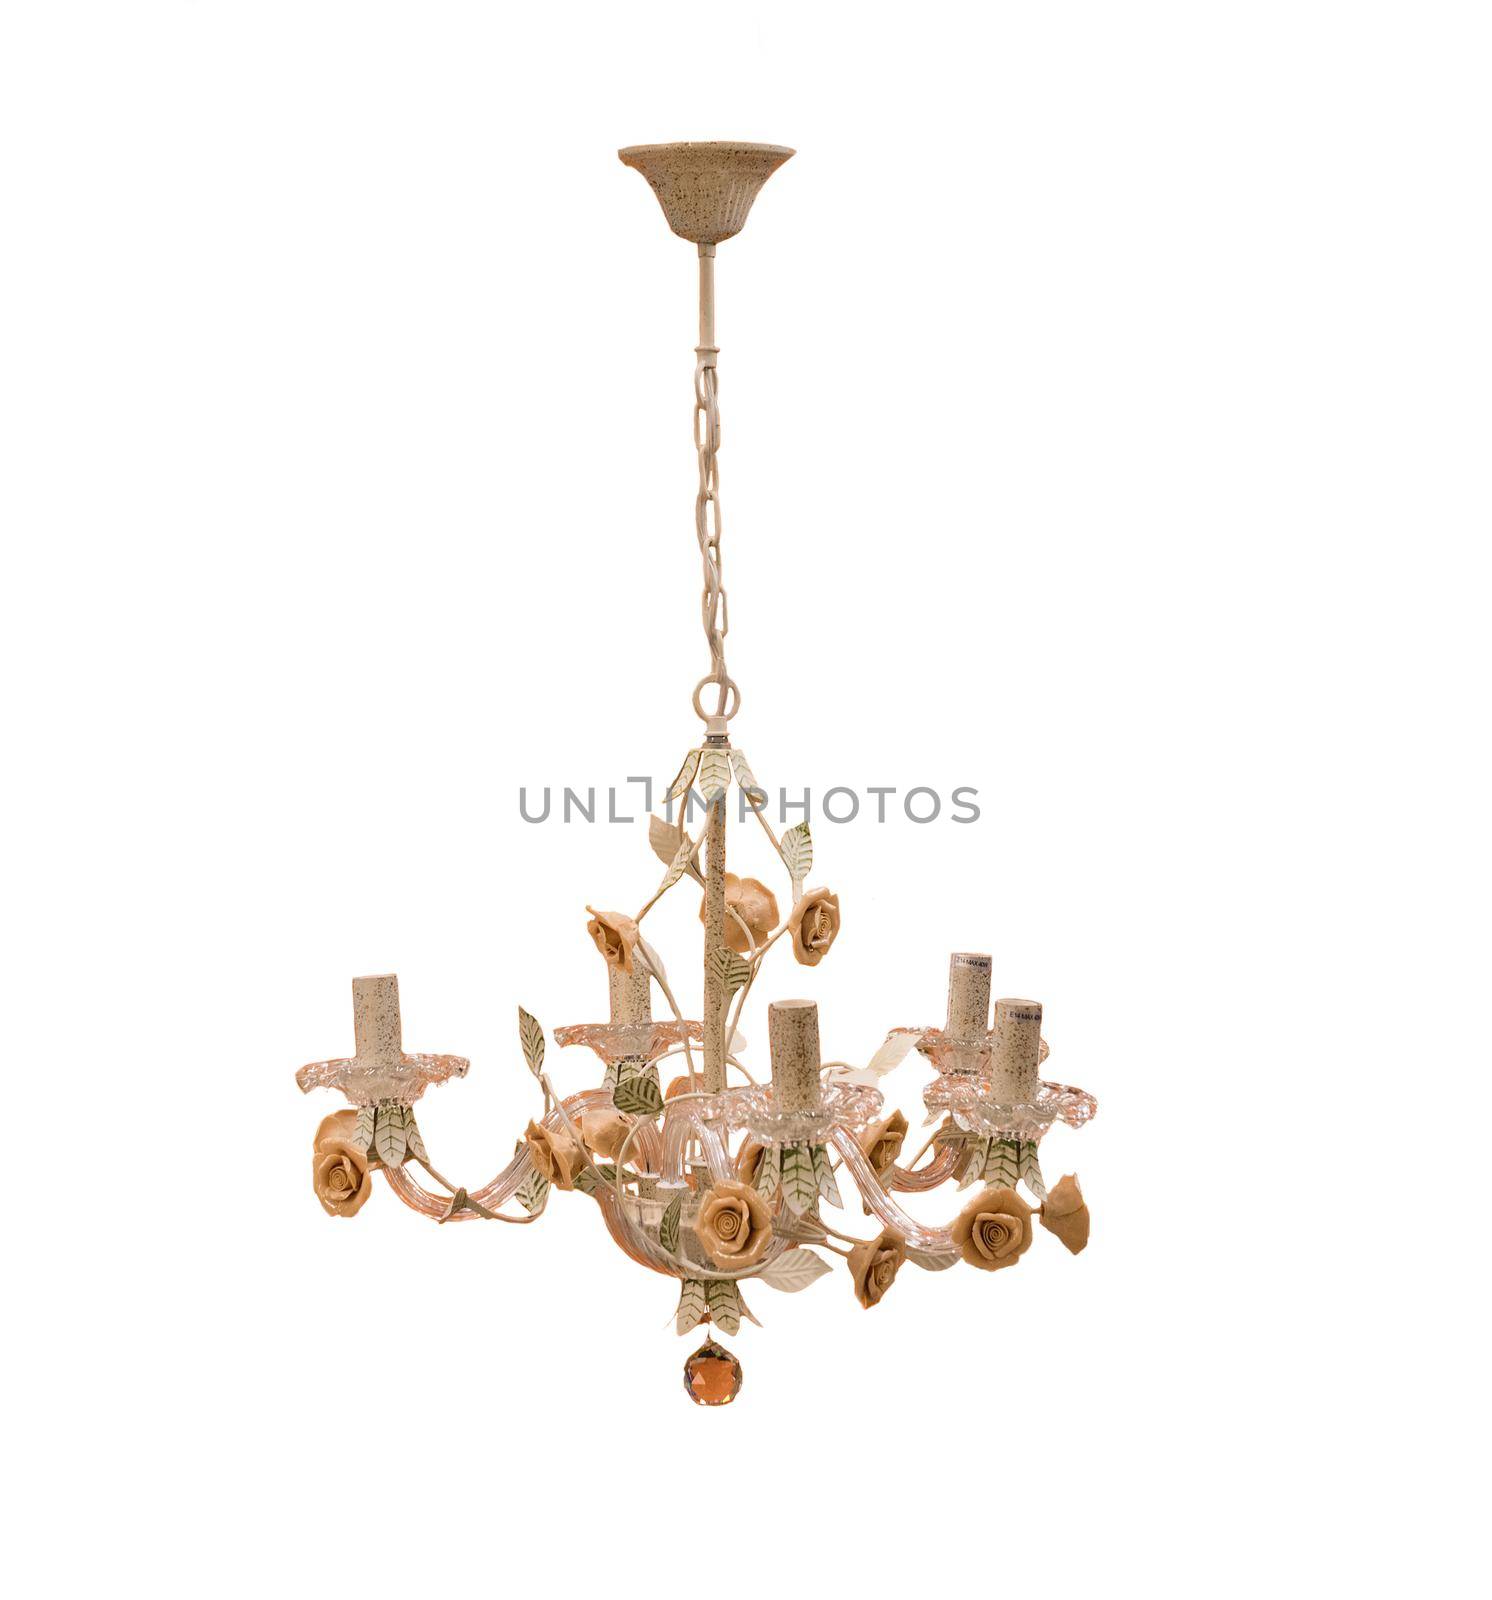 Crystal Chandelier on white background by ferhad